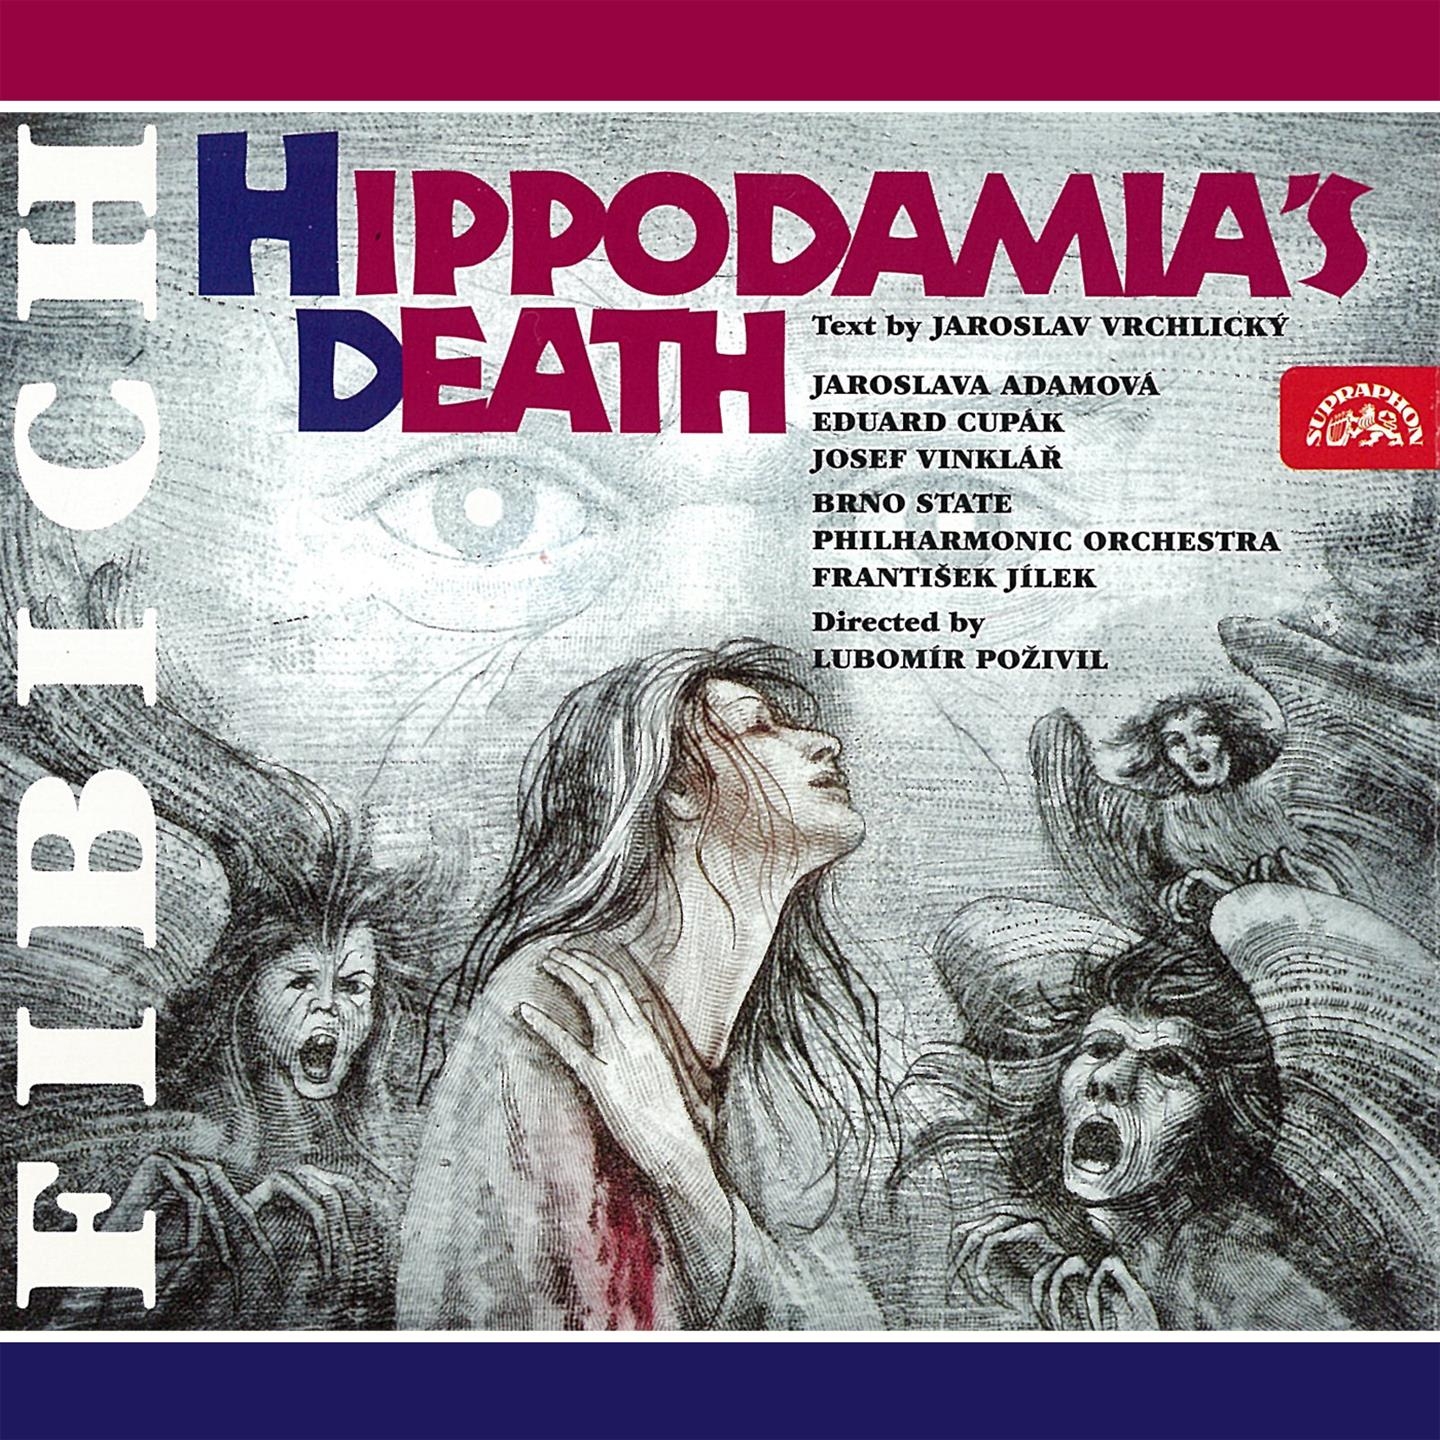 Hippodamia s Death, Op. 33, .: Act 1, Scene 5: What Would You of Me?